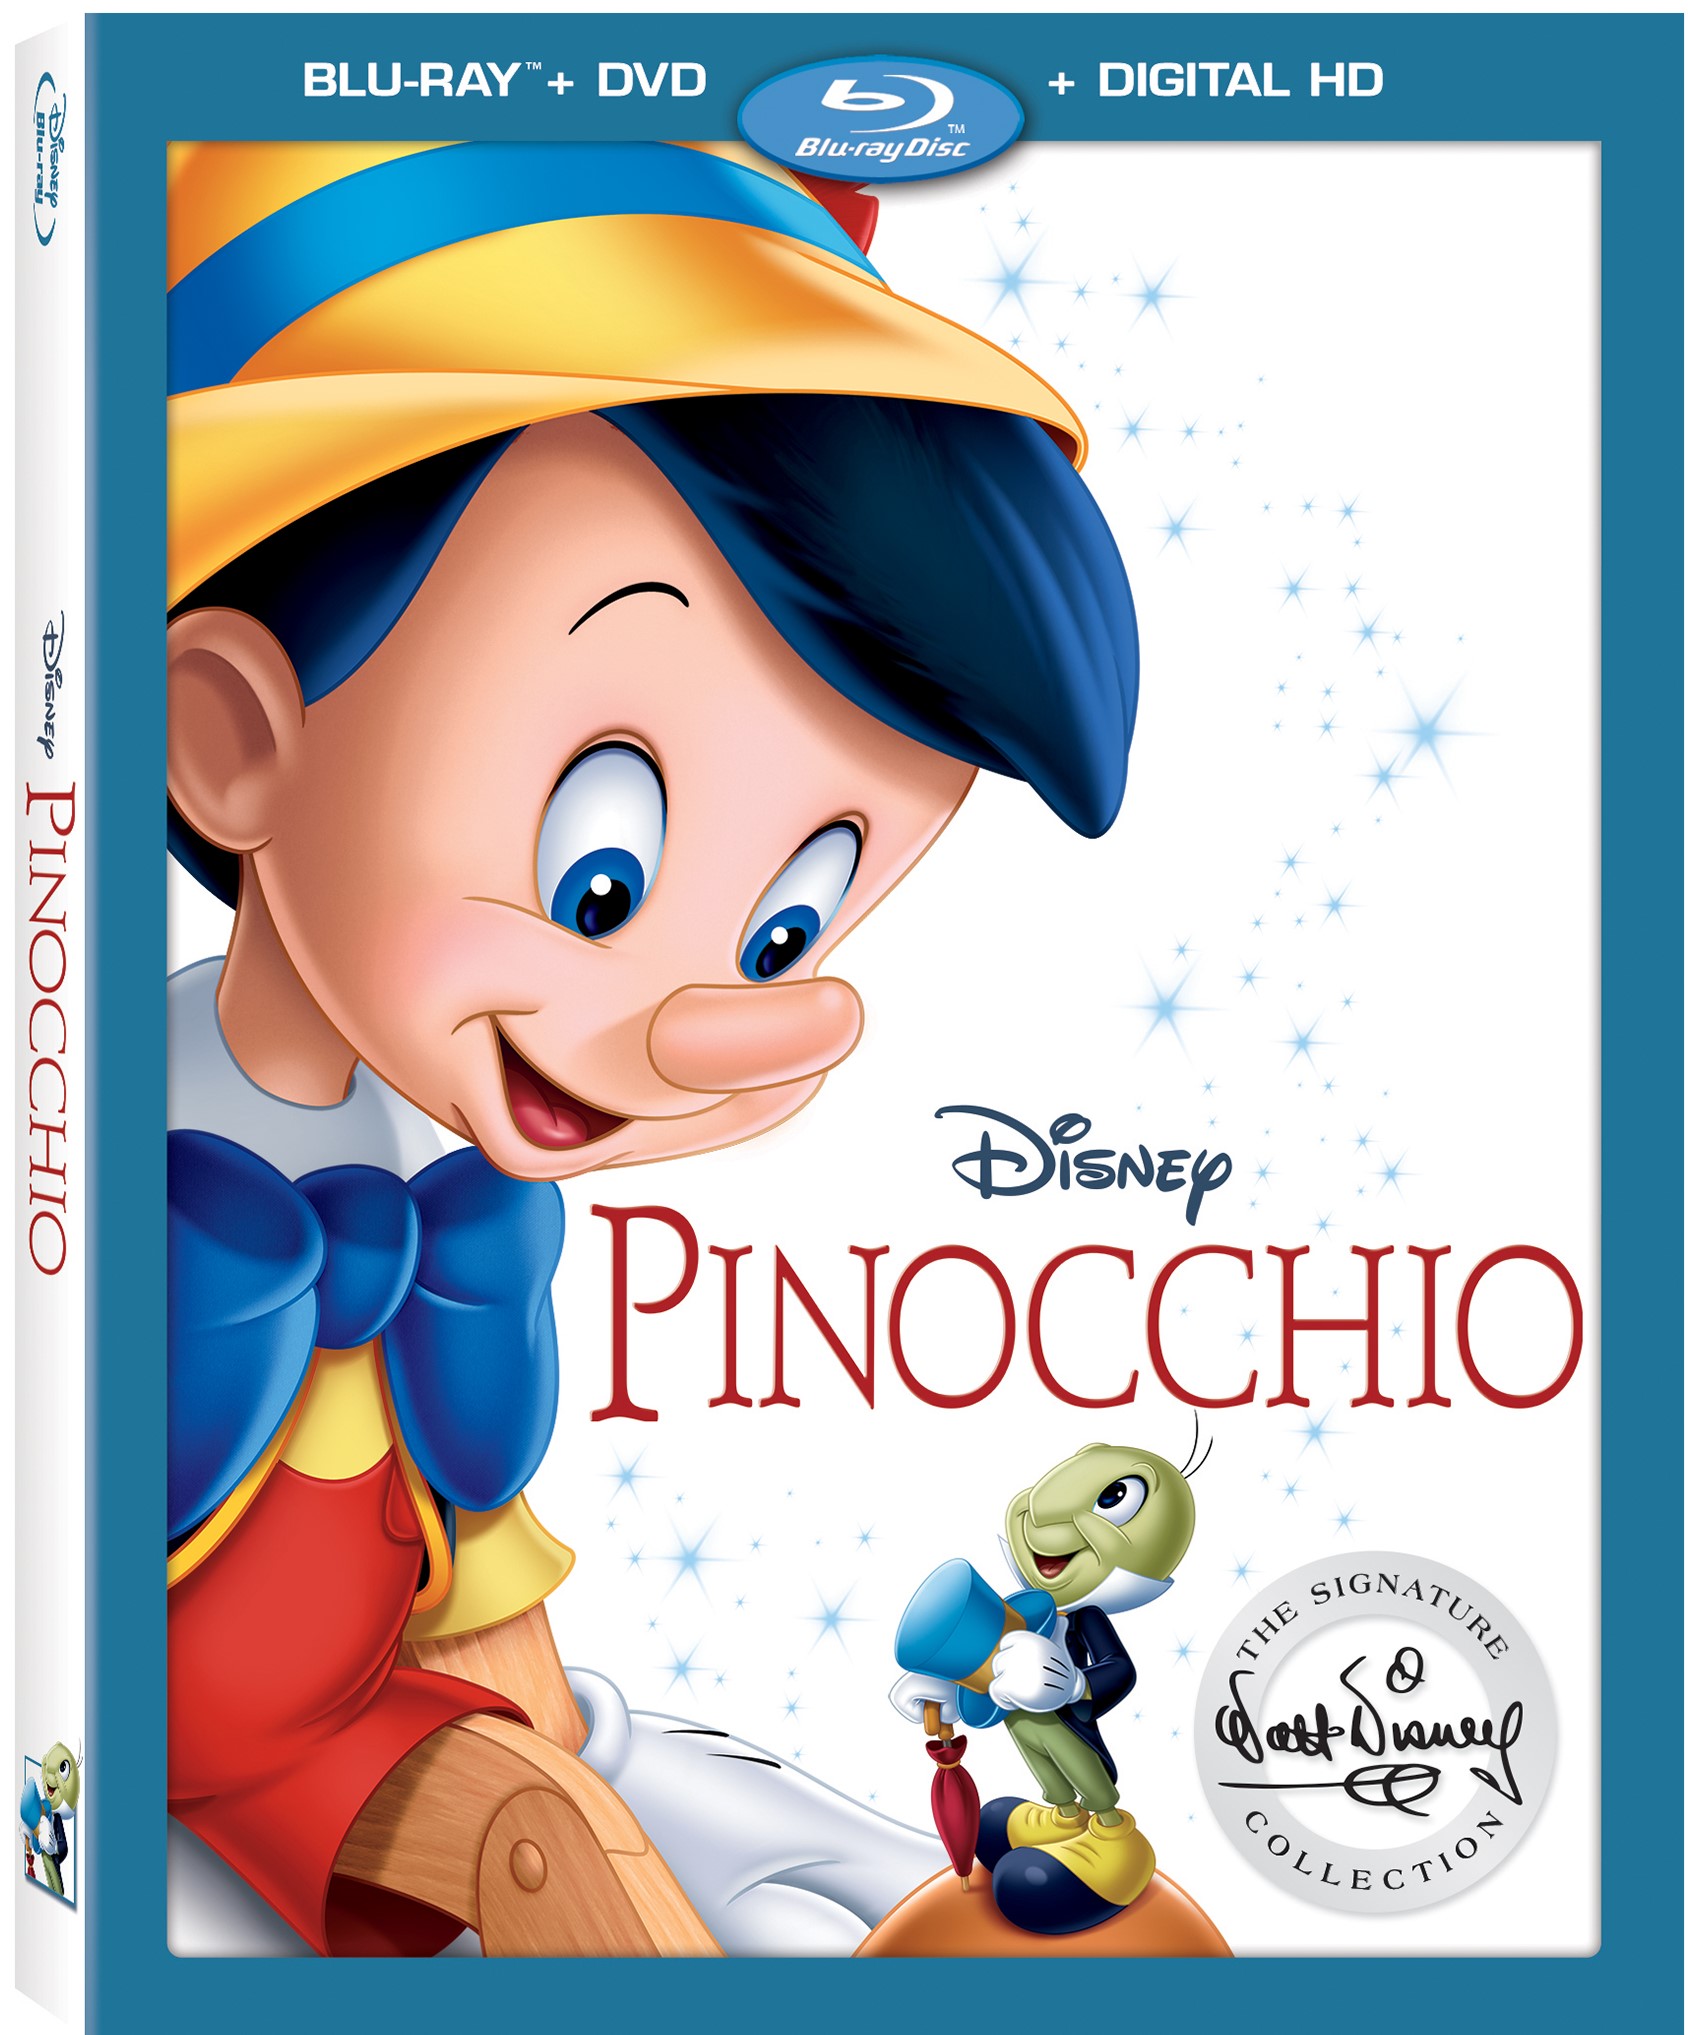 Pinocchio Coming Home in January as Part of Disney’s Signature Collection